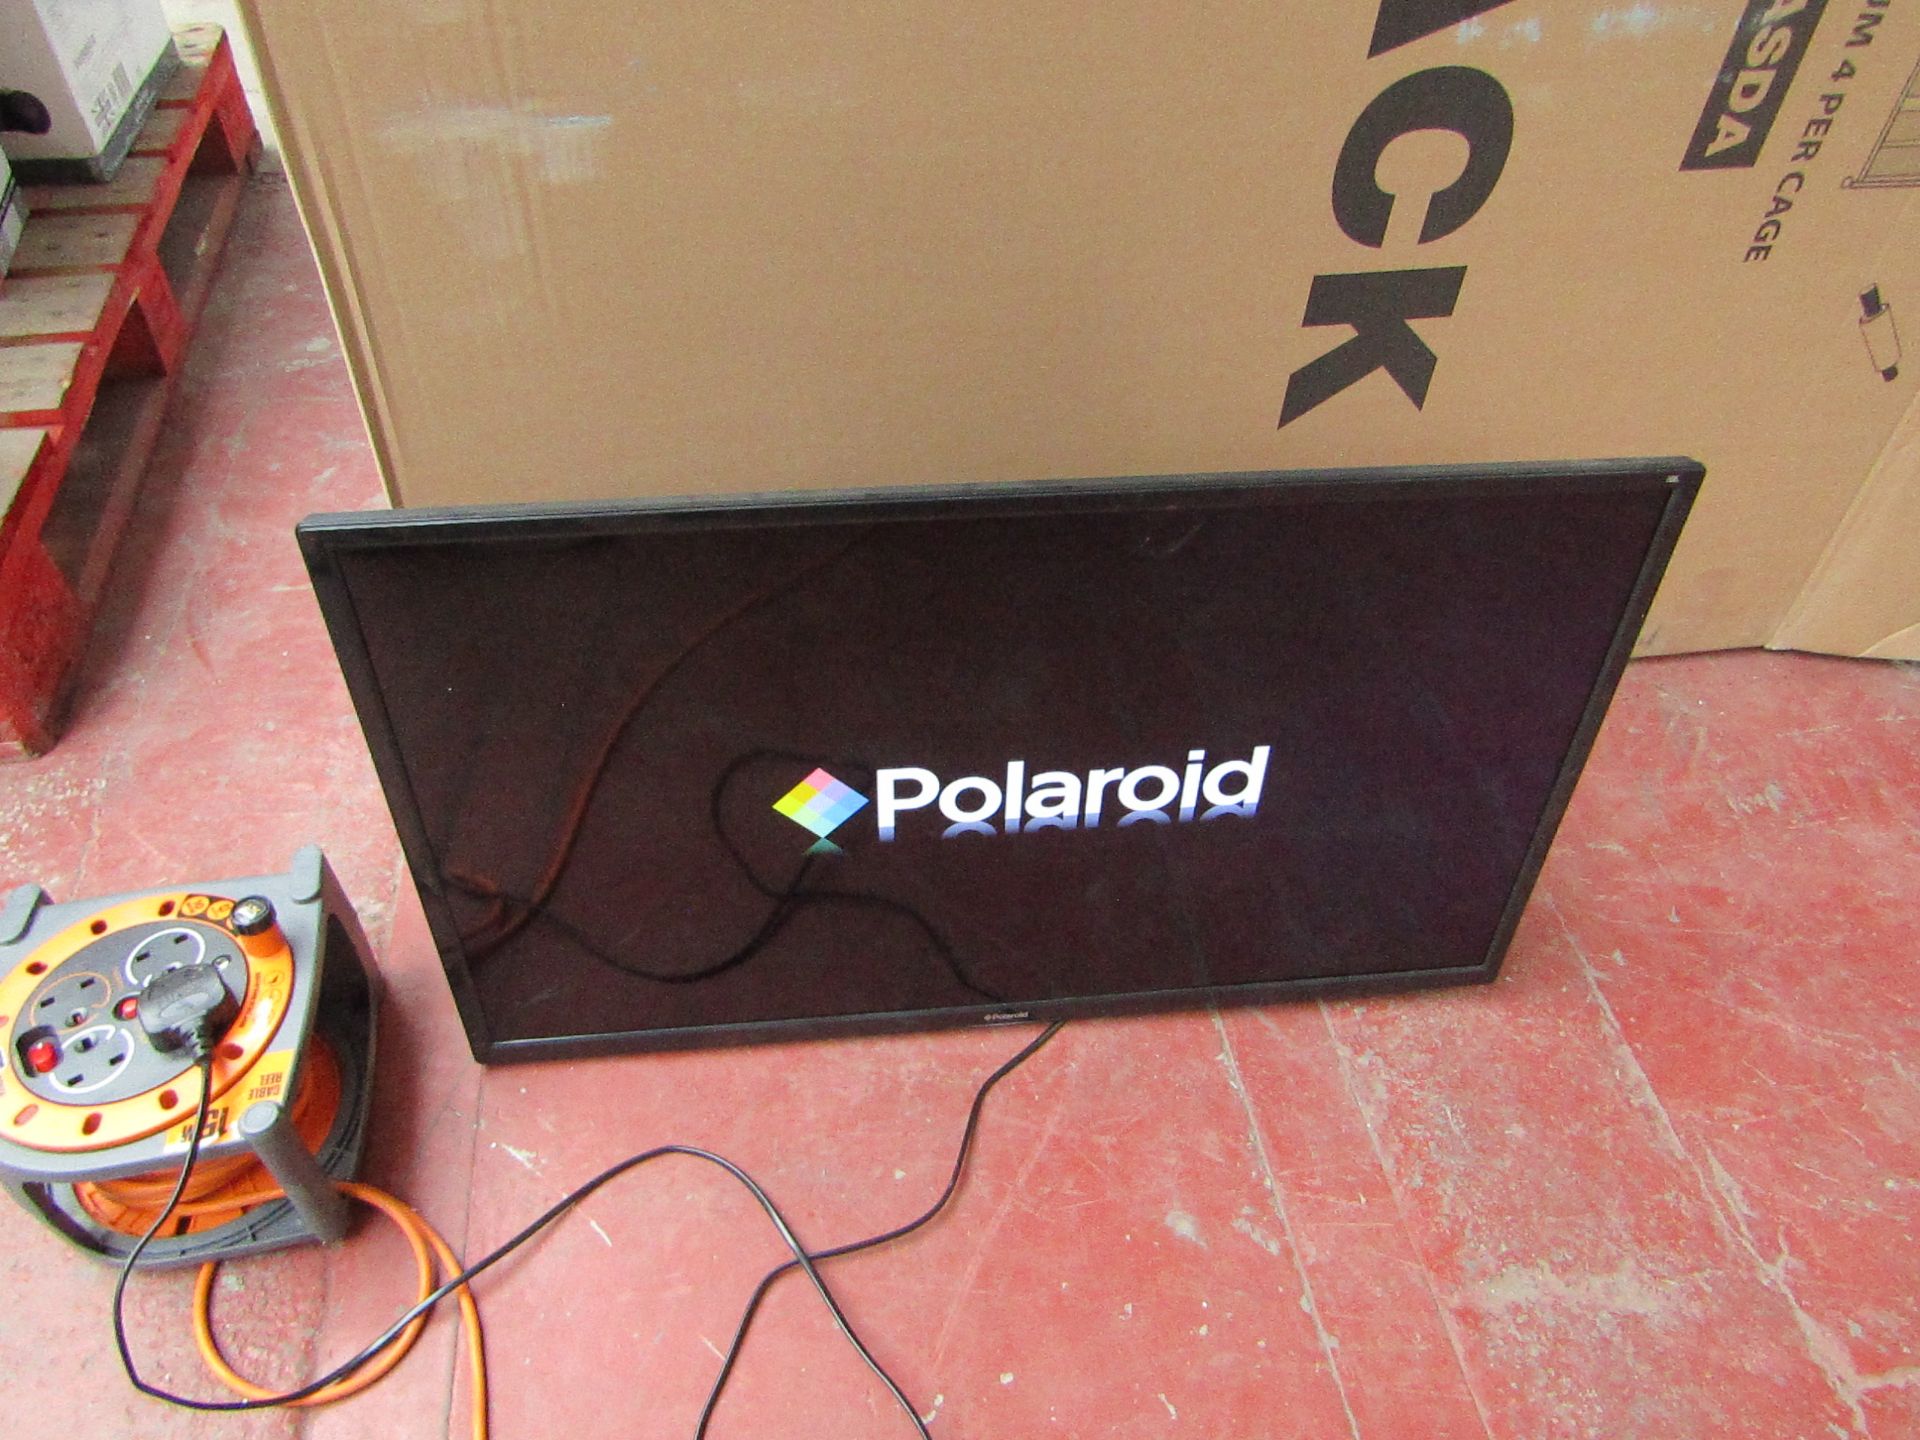 | 1x | POLAROID 32" HD READY SMART TV / DVD COMBI | POWERS ON INCLUDES REMOTE CONTROL & STAND |